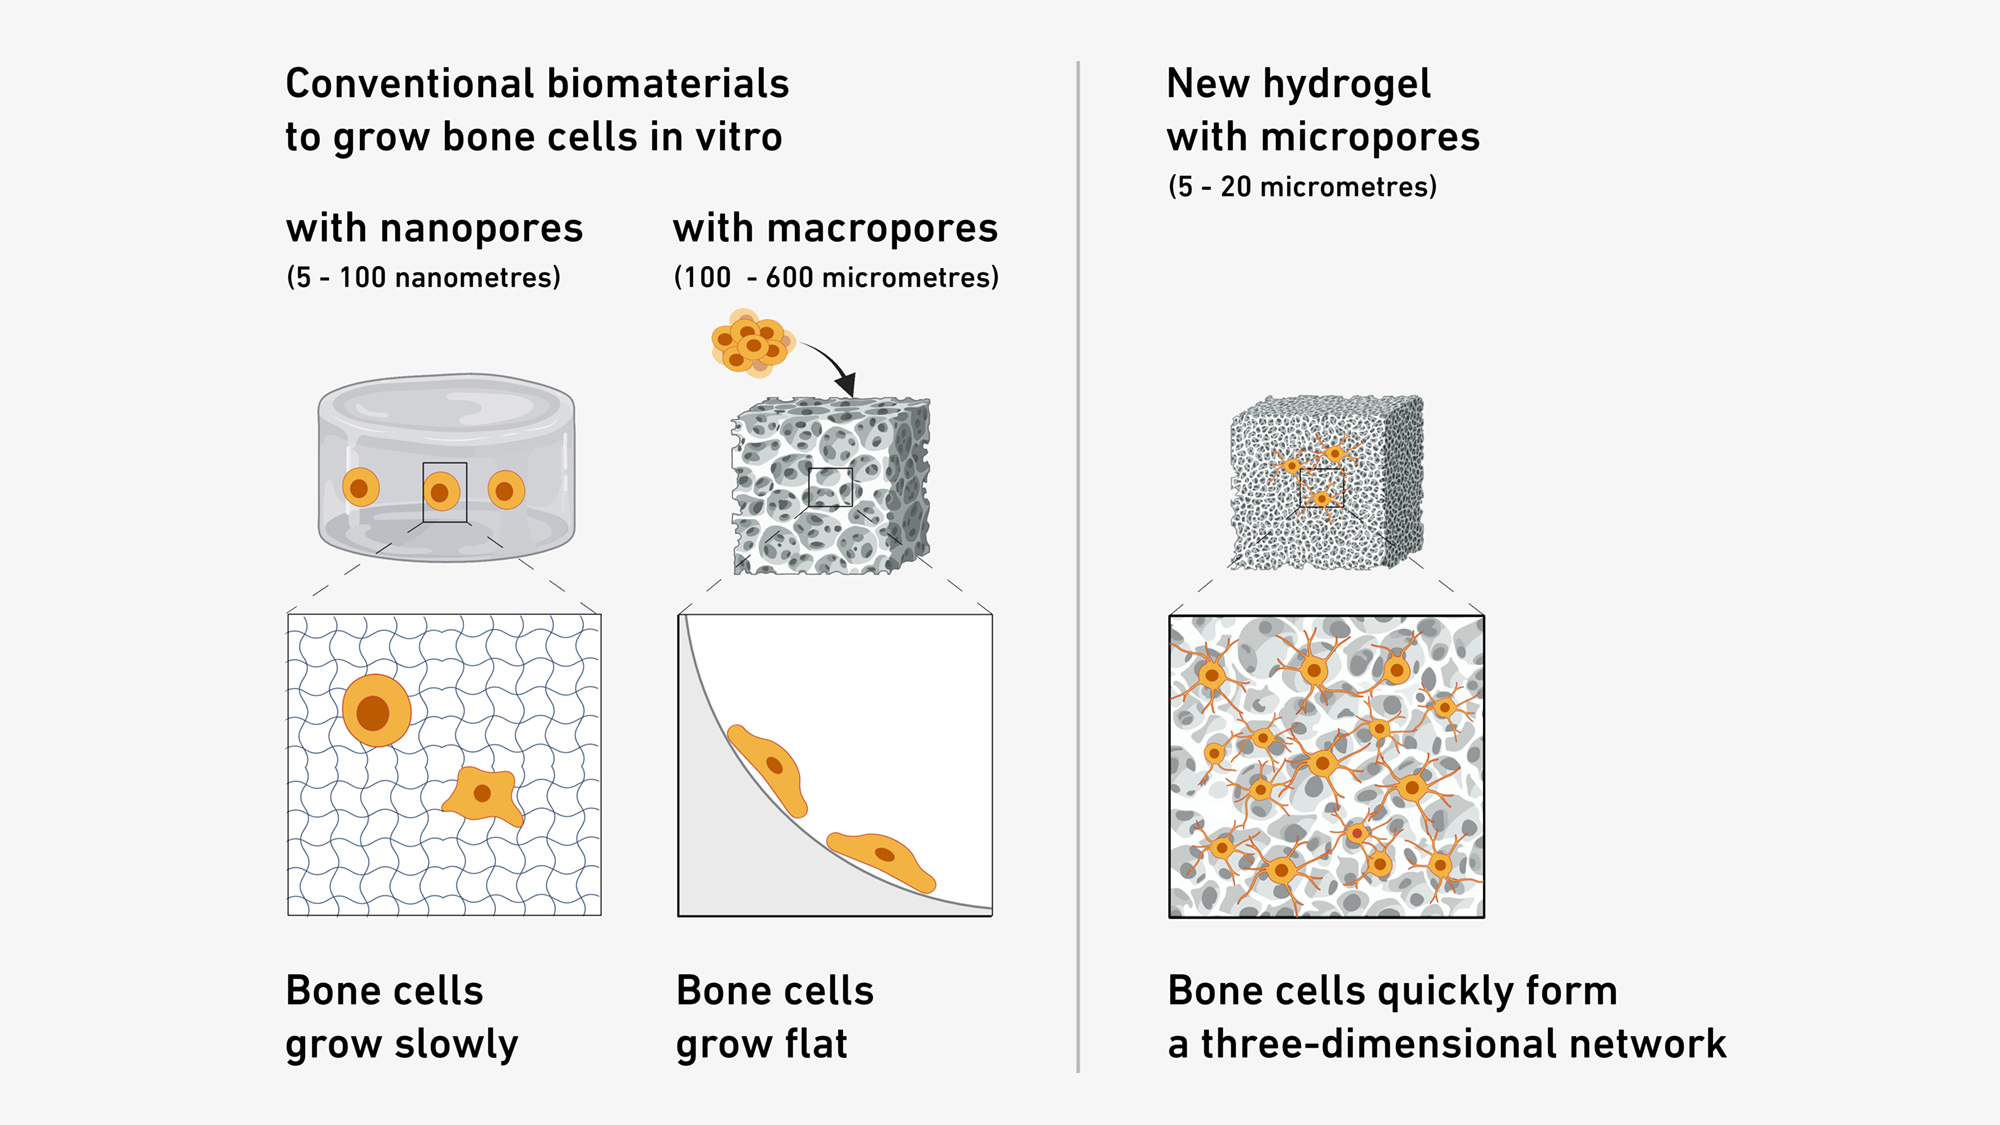 Enlarged view: Model for growing bone cells in vitro